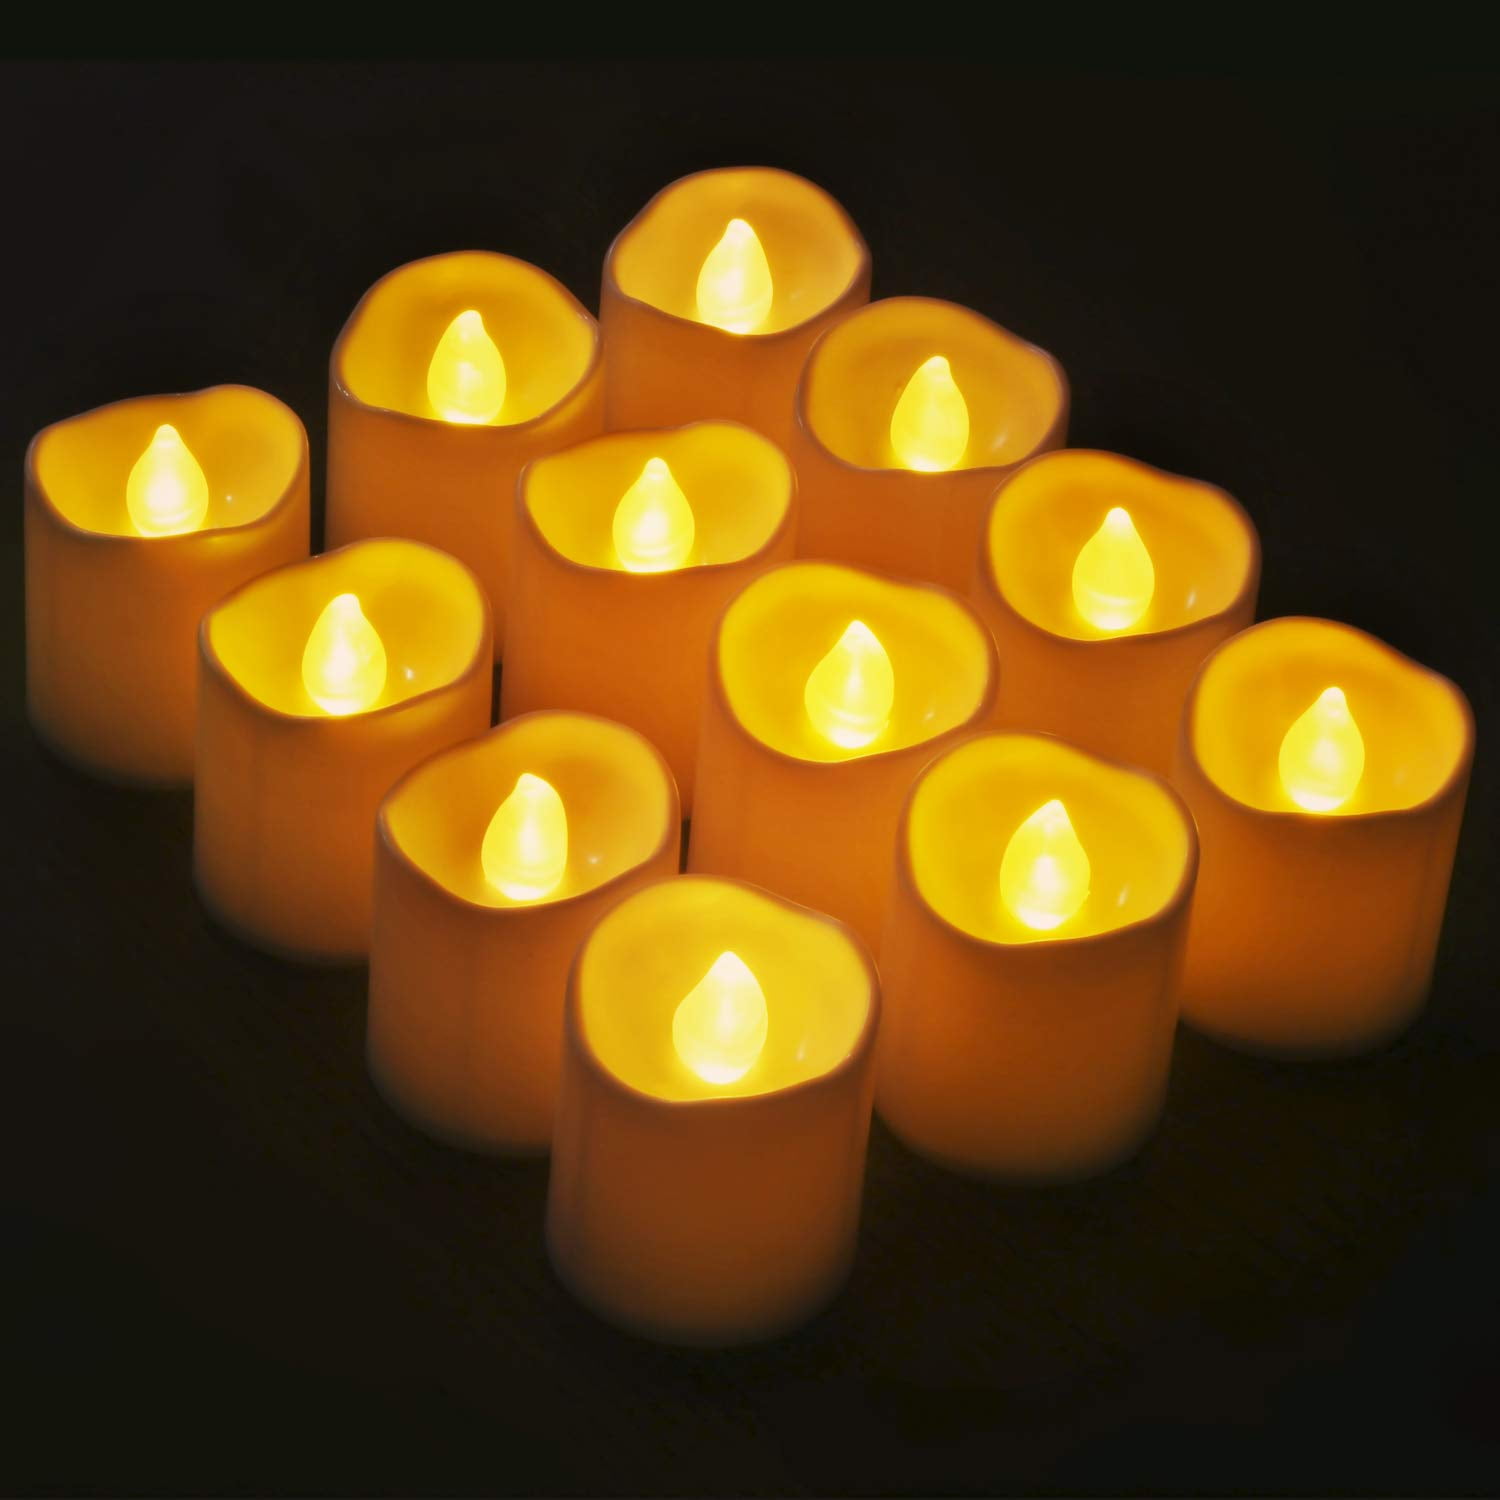 48 Candles Instapark LCL-48 Battery-Powered Flameless LED Tealight Candles 